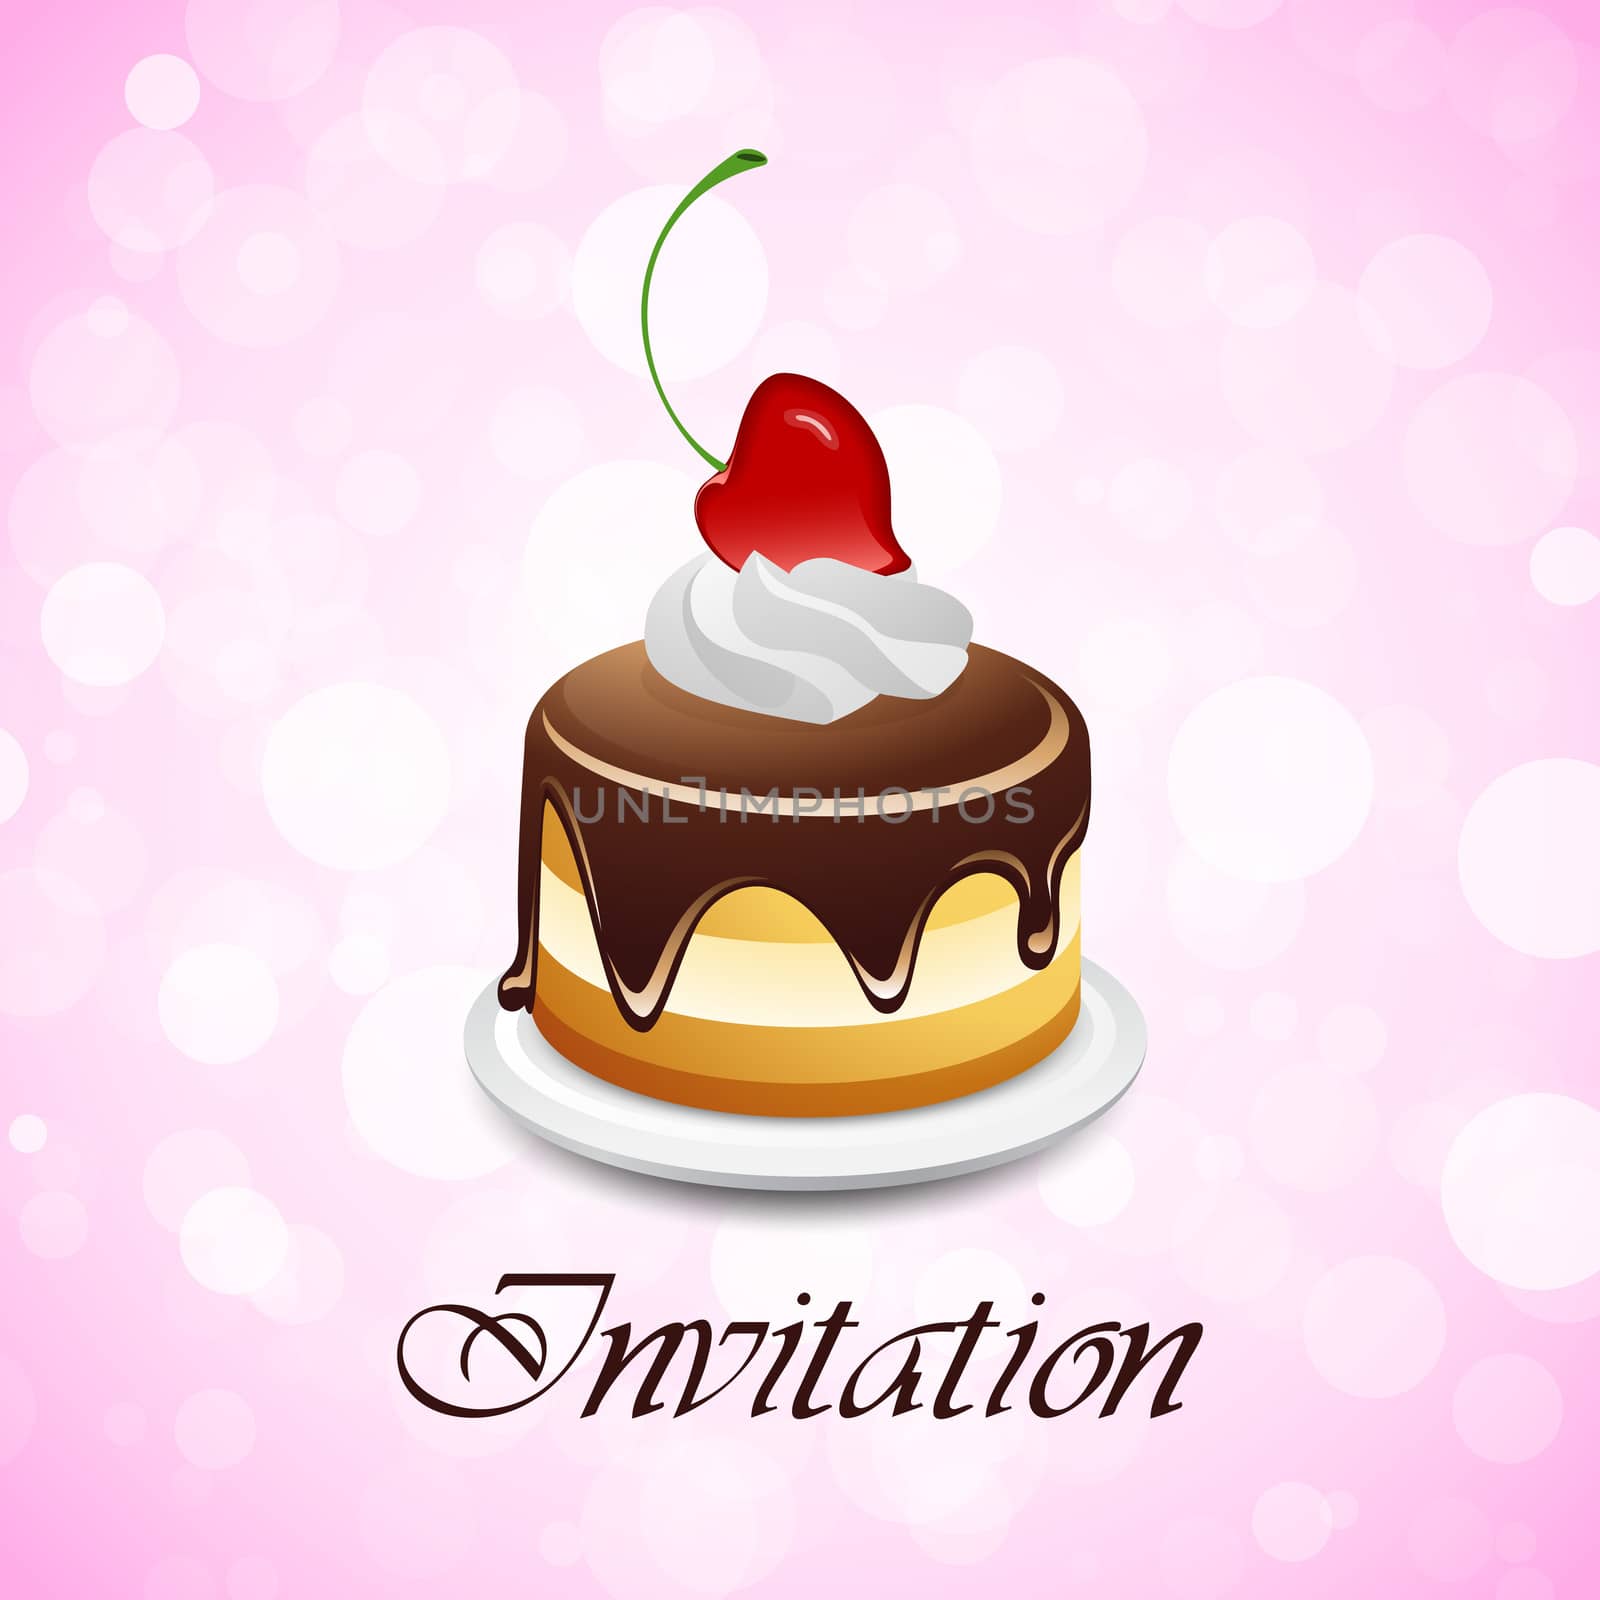 Valentines Day Background Invitation with Cake